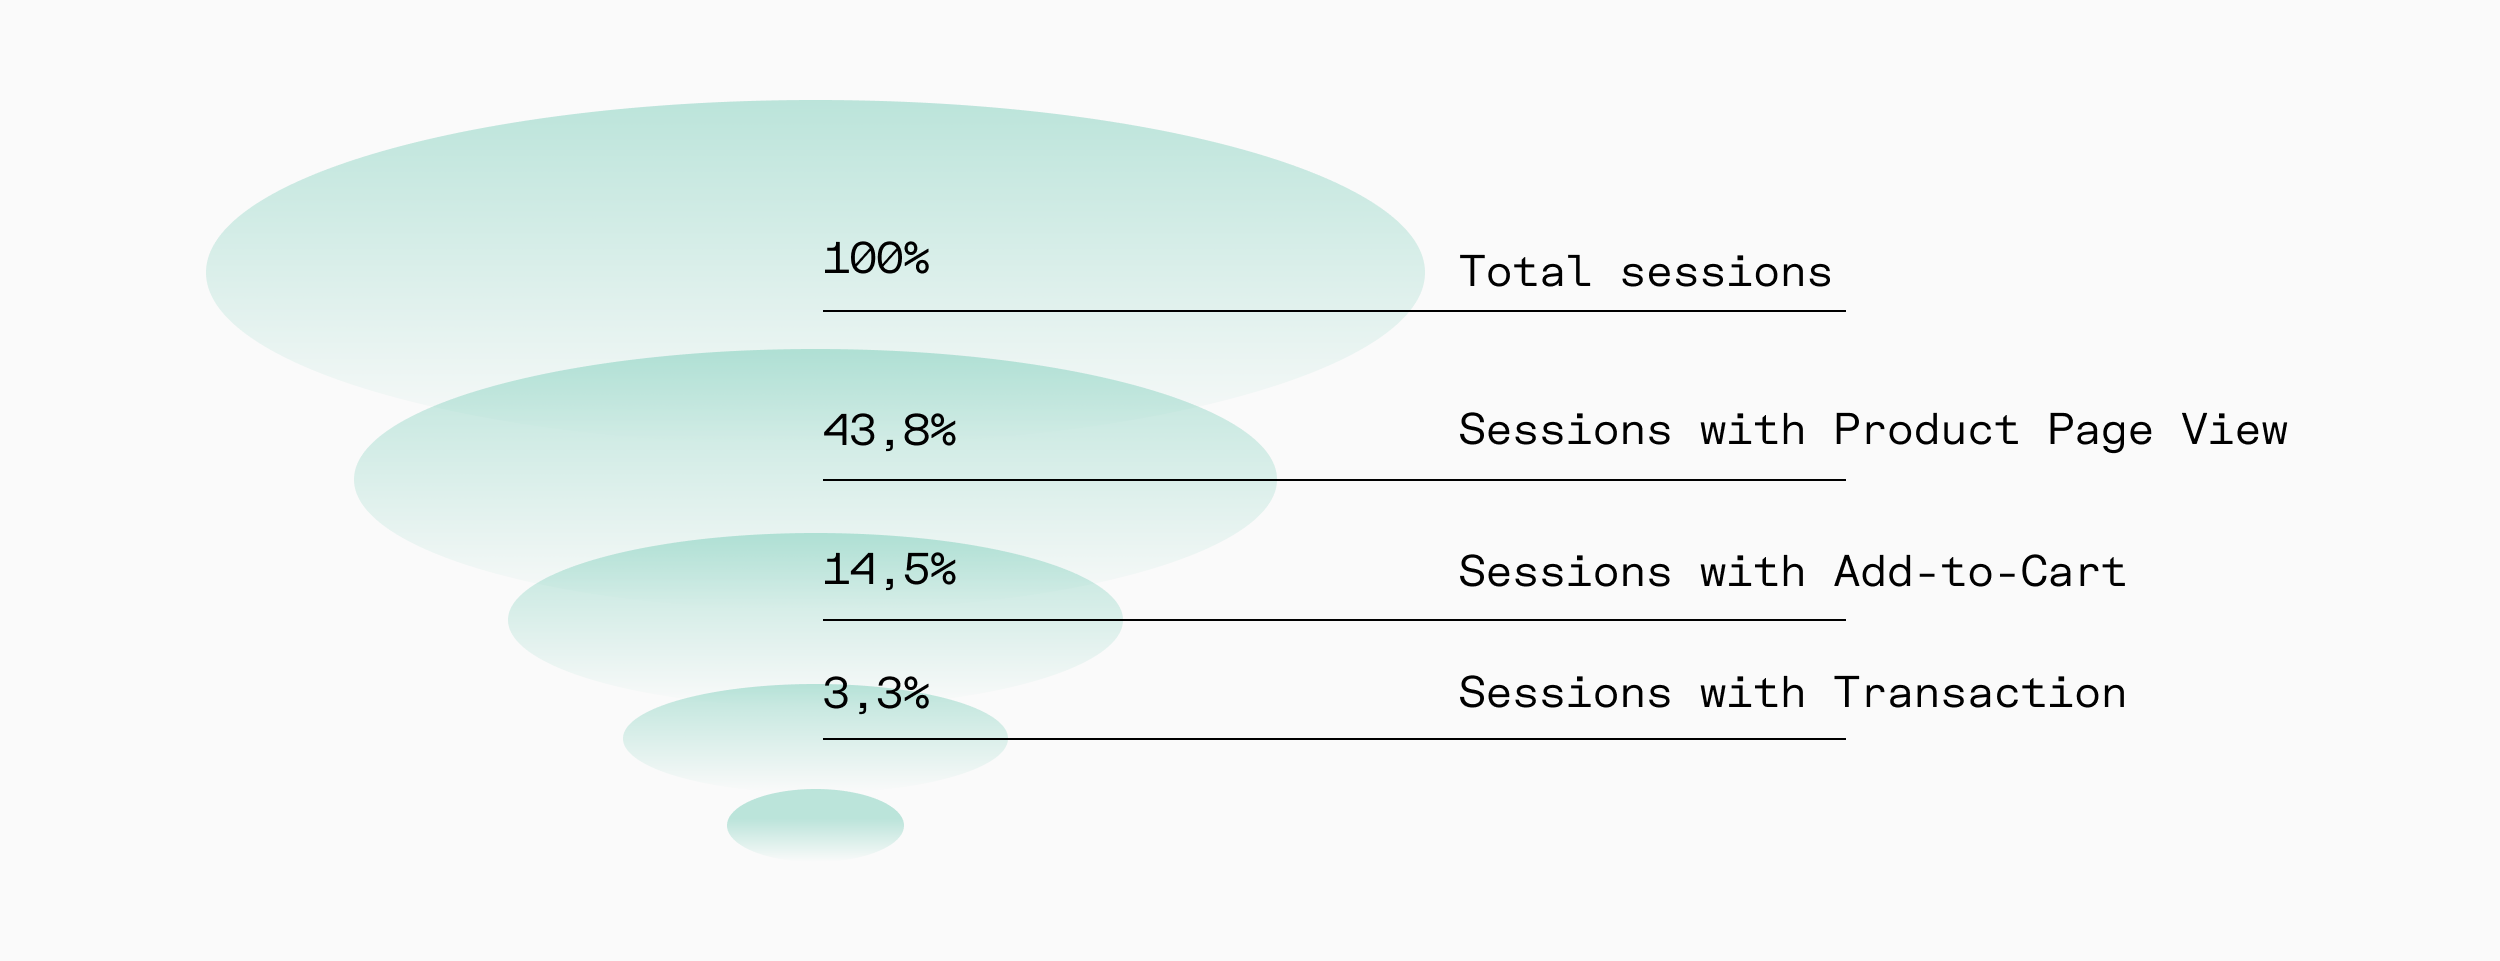 Types of sessions per actions taken